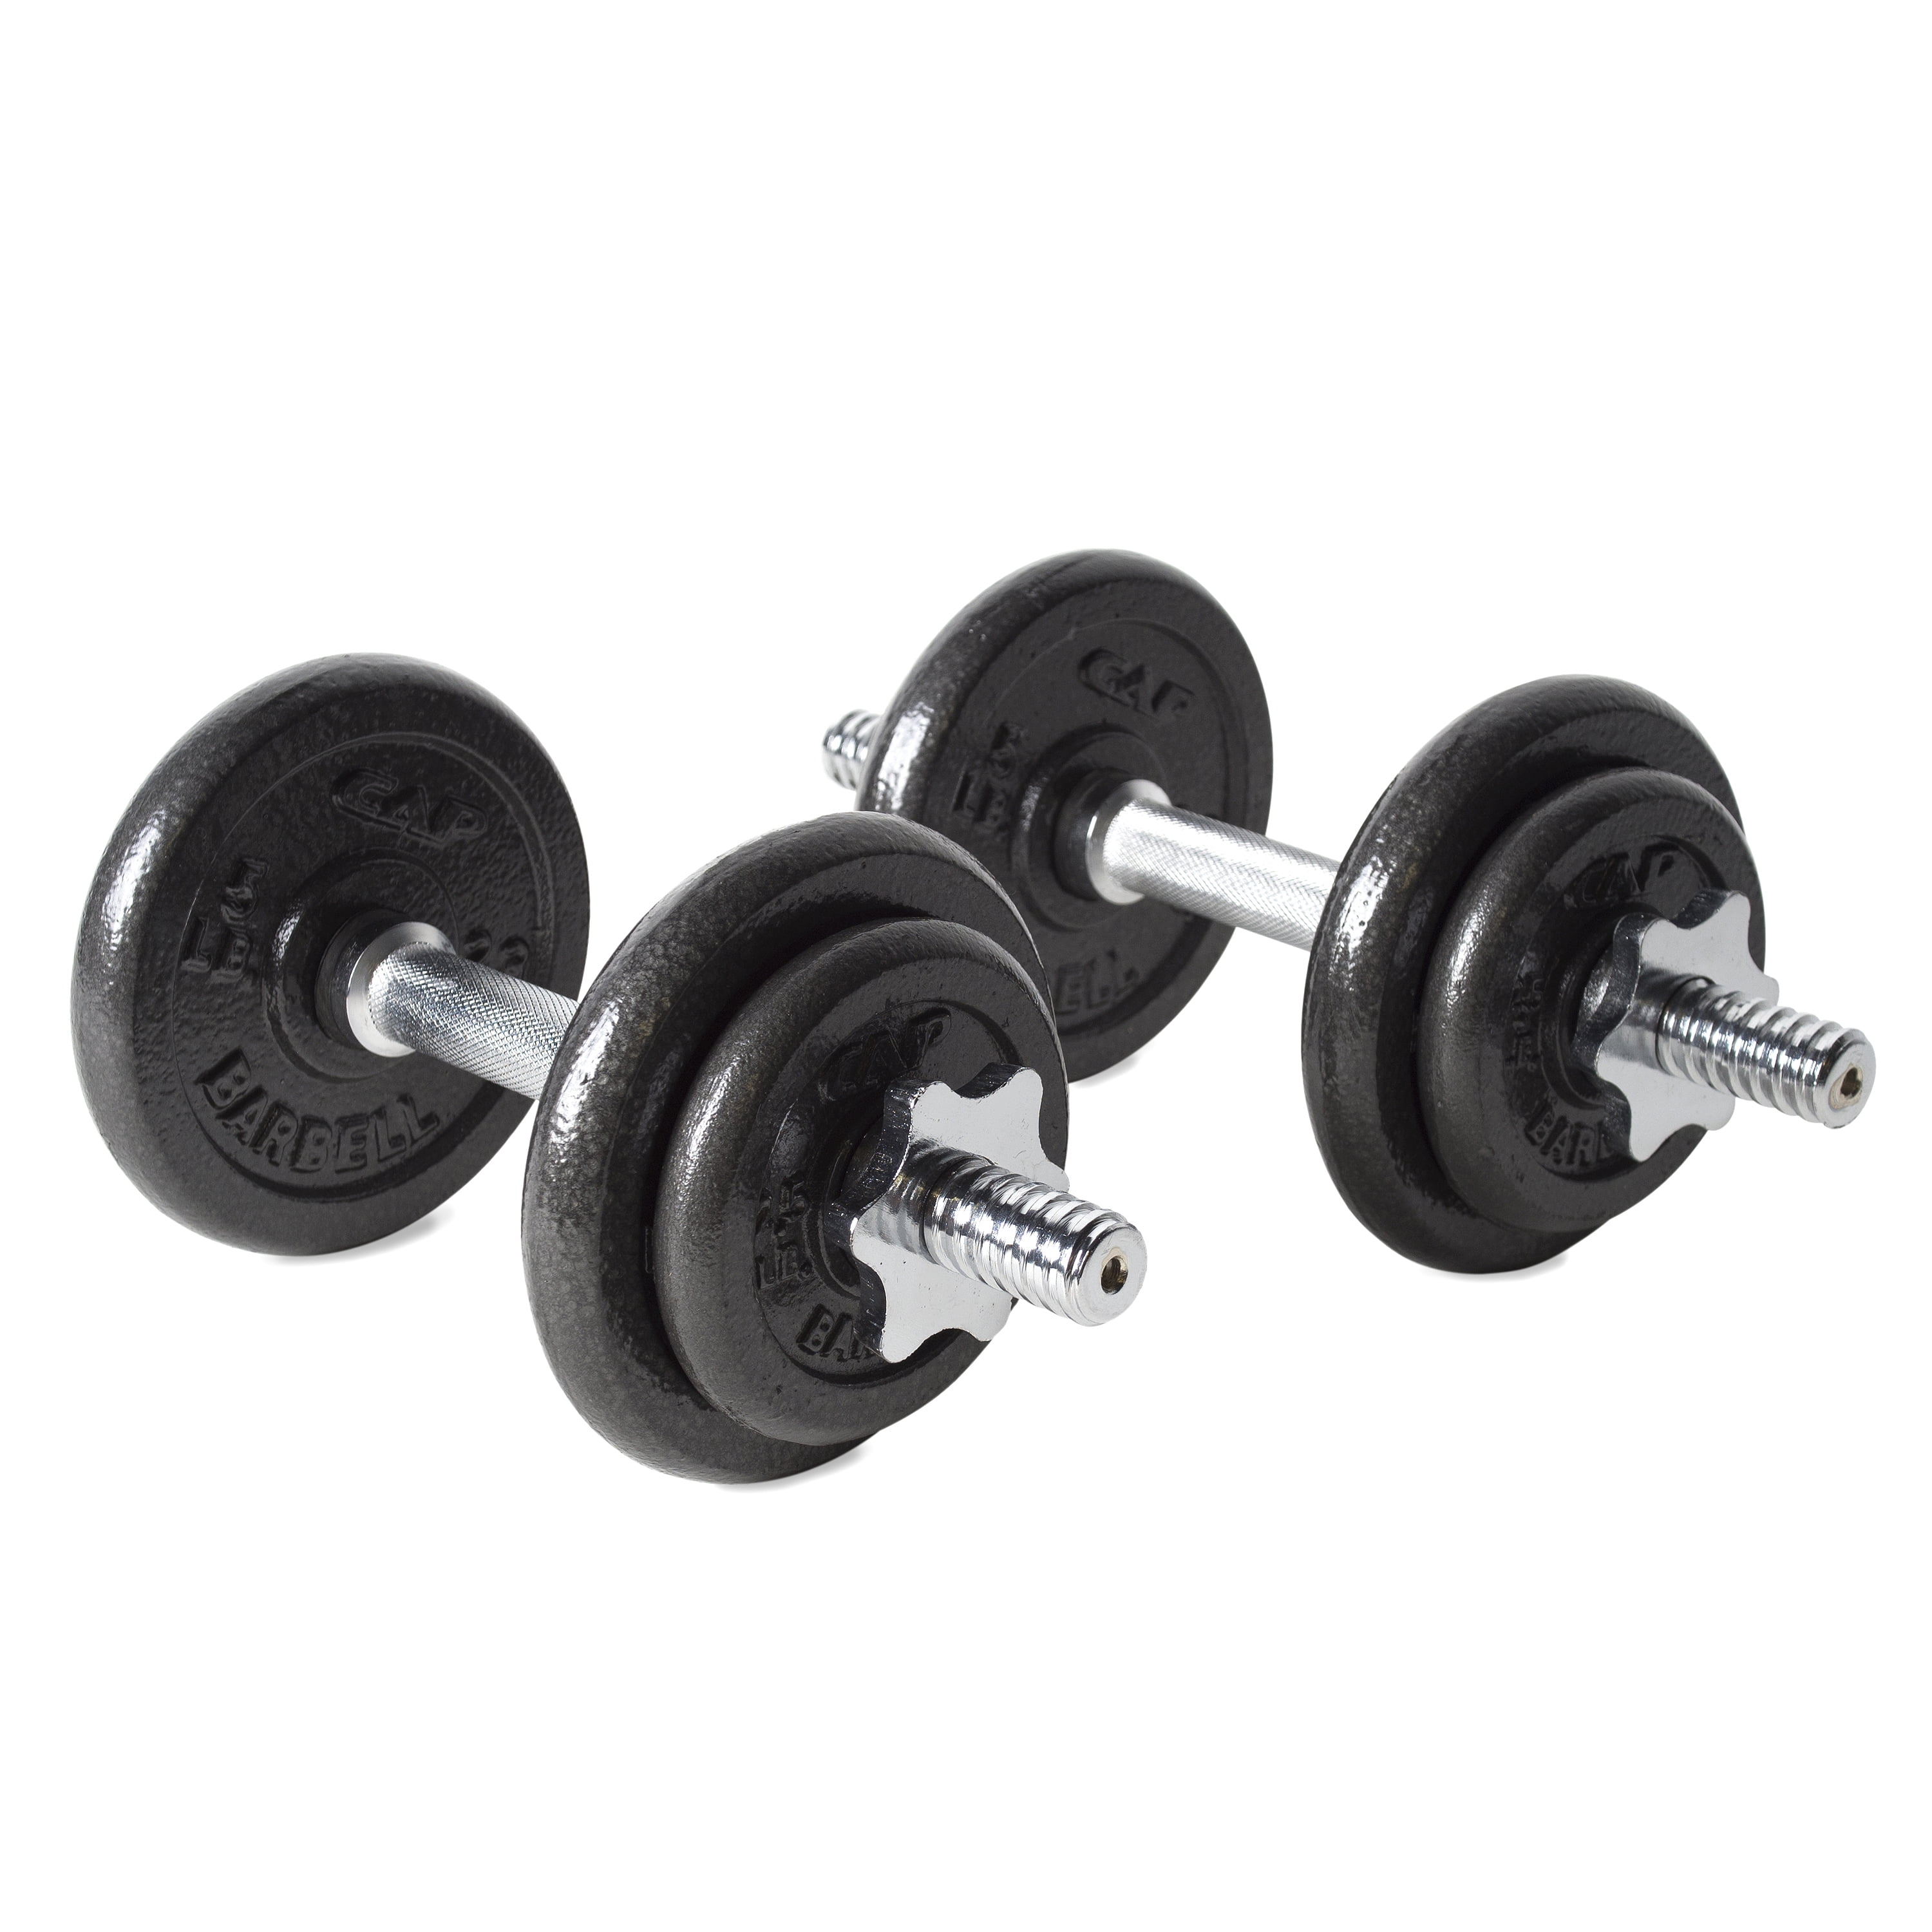 40LB Free Weights Adjustable Dumbbells Set for Home Gym Used as Dumbells  Barbell Kettlebells Push Up Stand for Men and Women Exercise & Fitness  Equipment, 40Lbs Weights Set, Dumbbells -  Canada